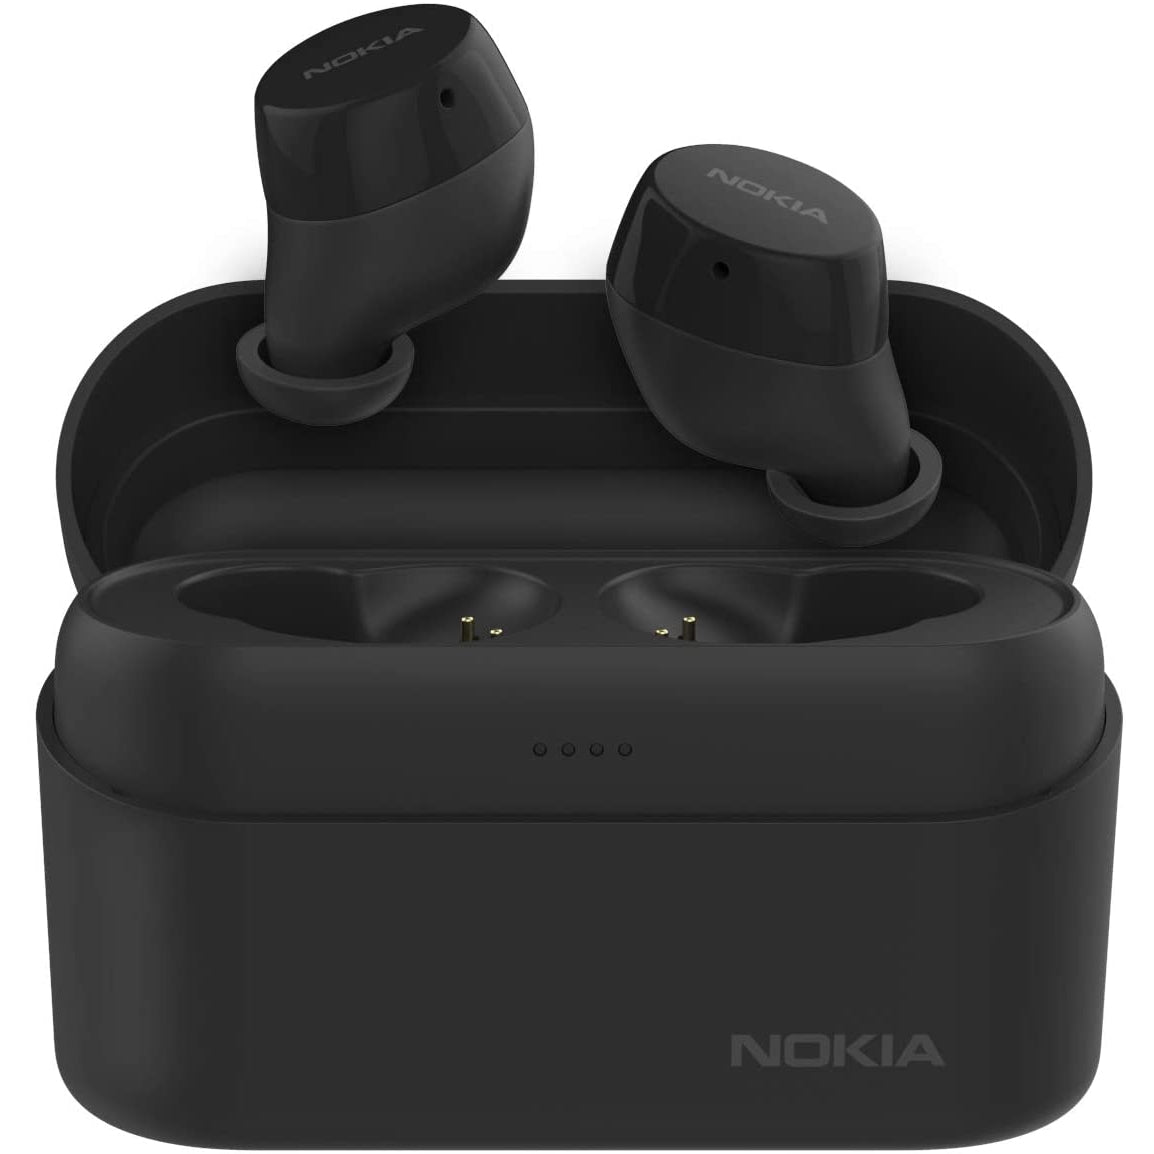 Nokia Power BH-605 Wireless Earbuds with Bluetooth, Black - Refurbished Excellent